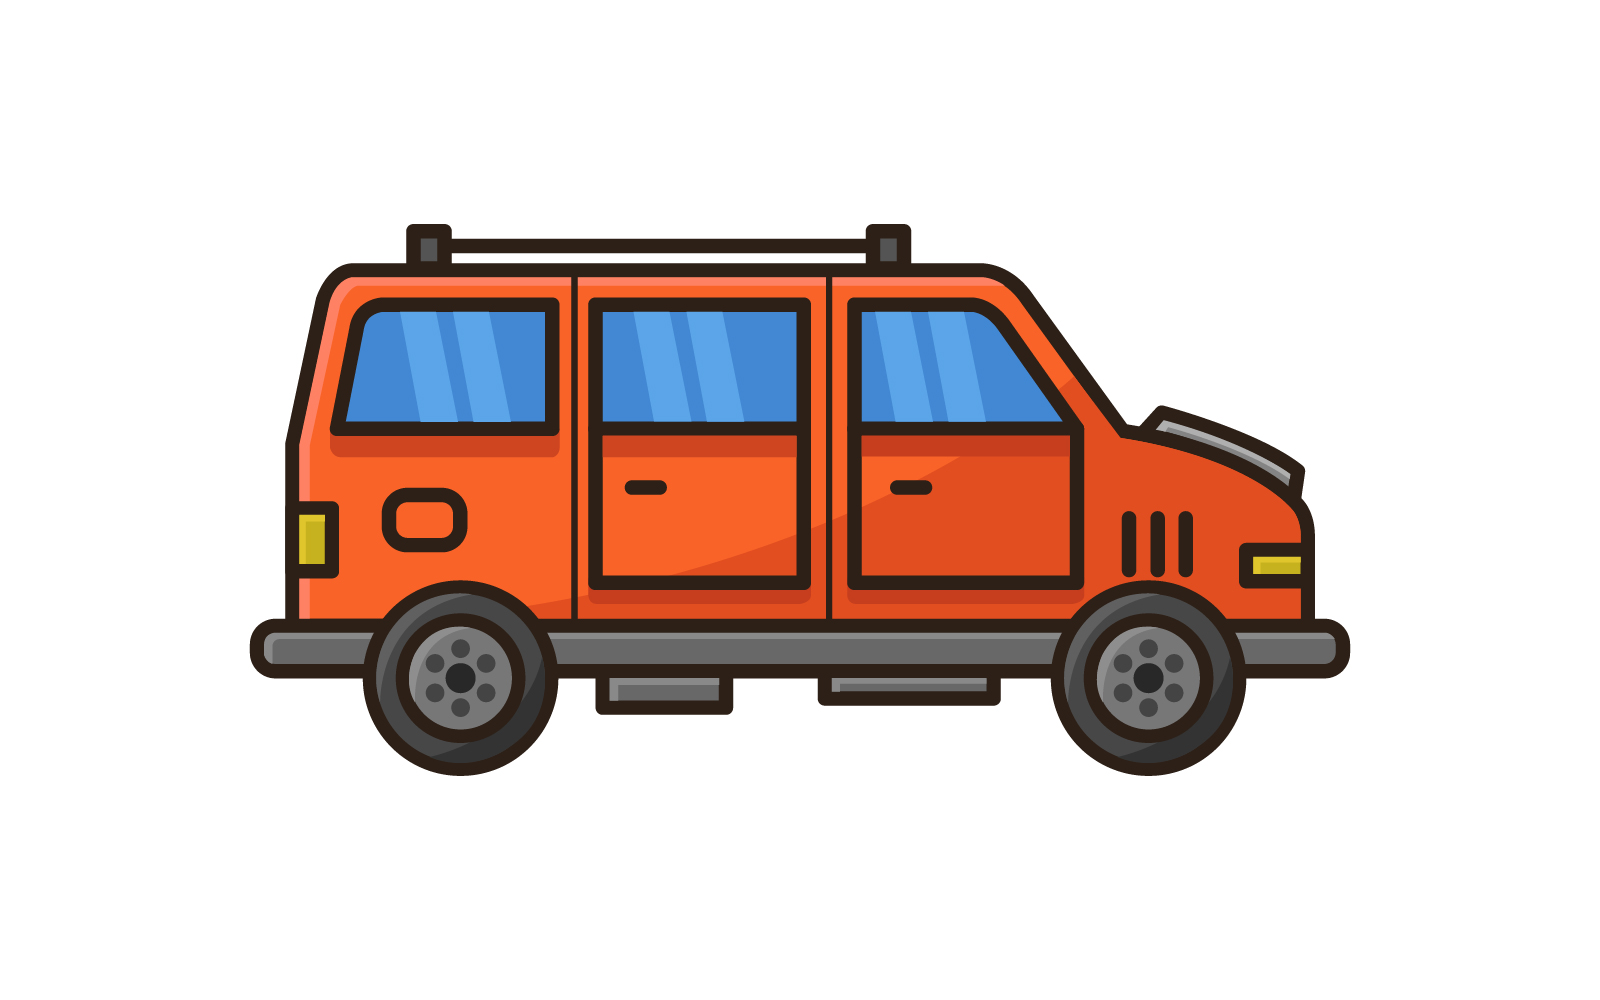 Van illustrated in vector on a background